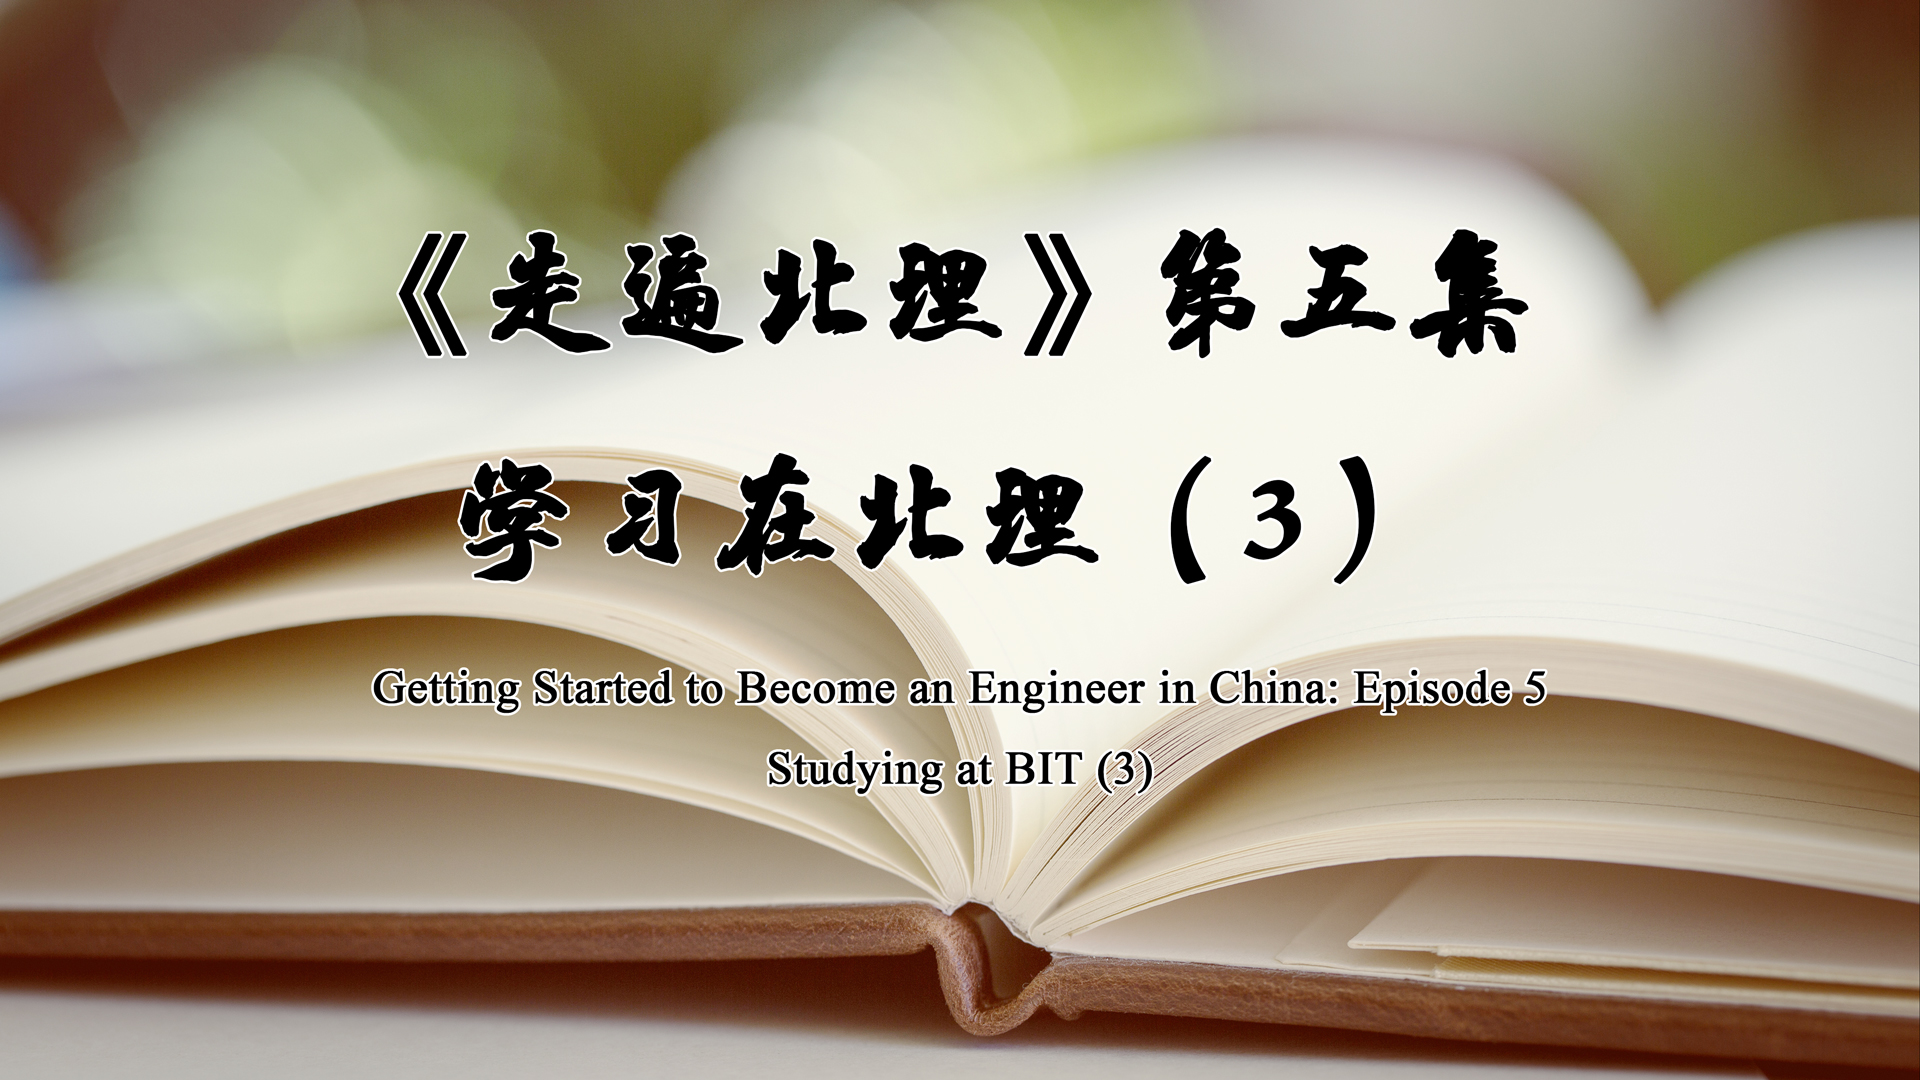 Getting started to become an engineer in China-Episode 5: Studying at BIT (3)